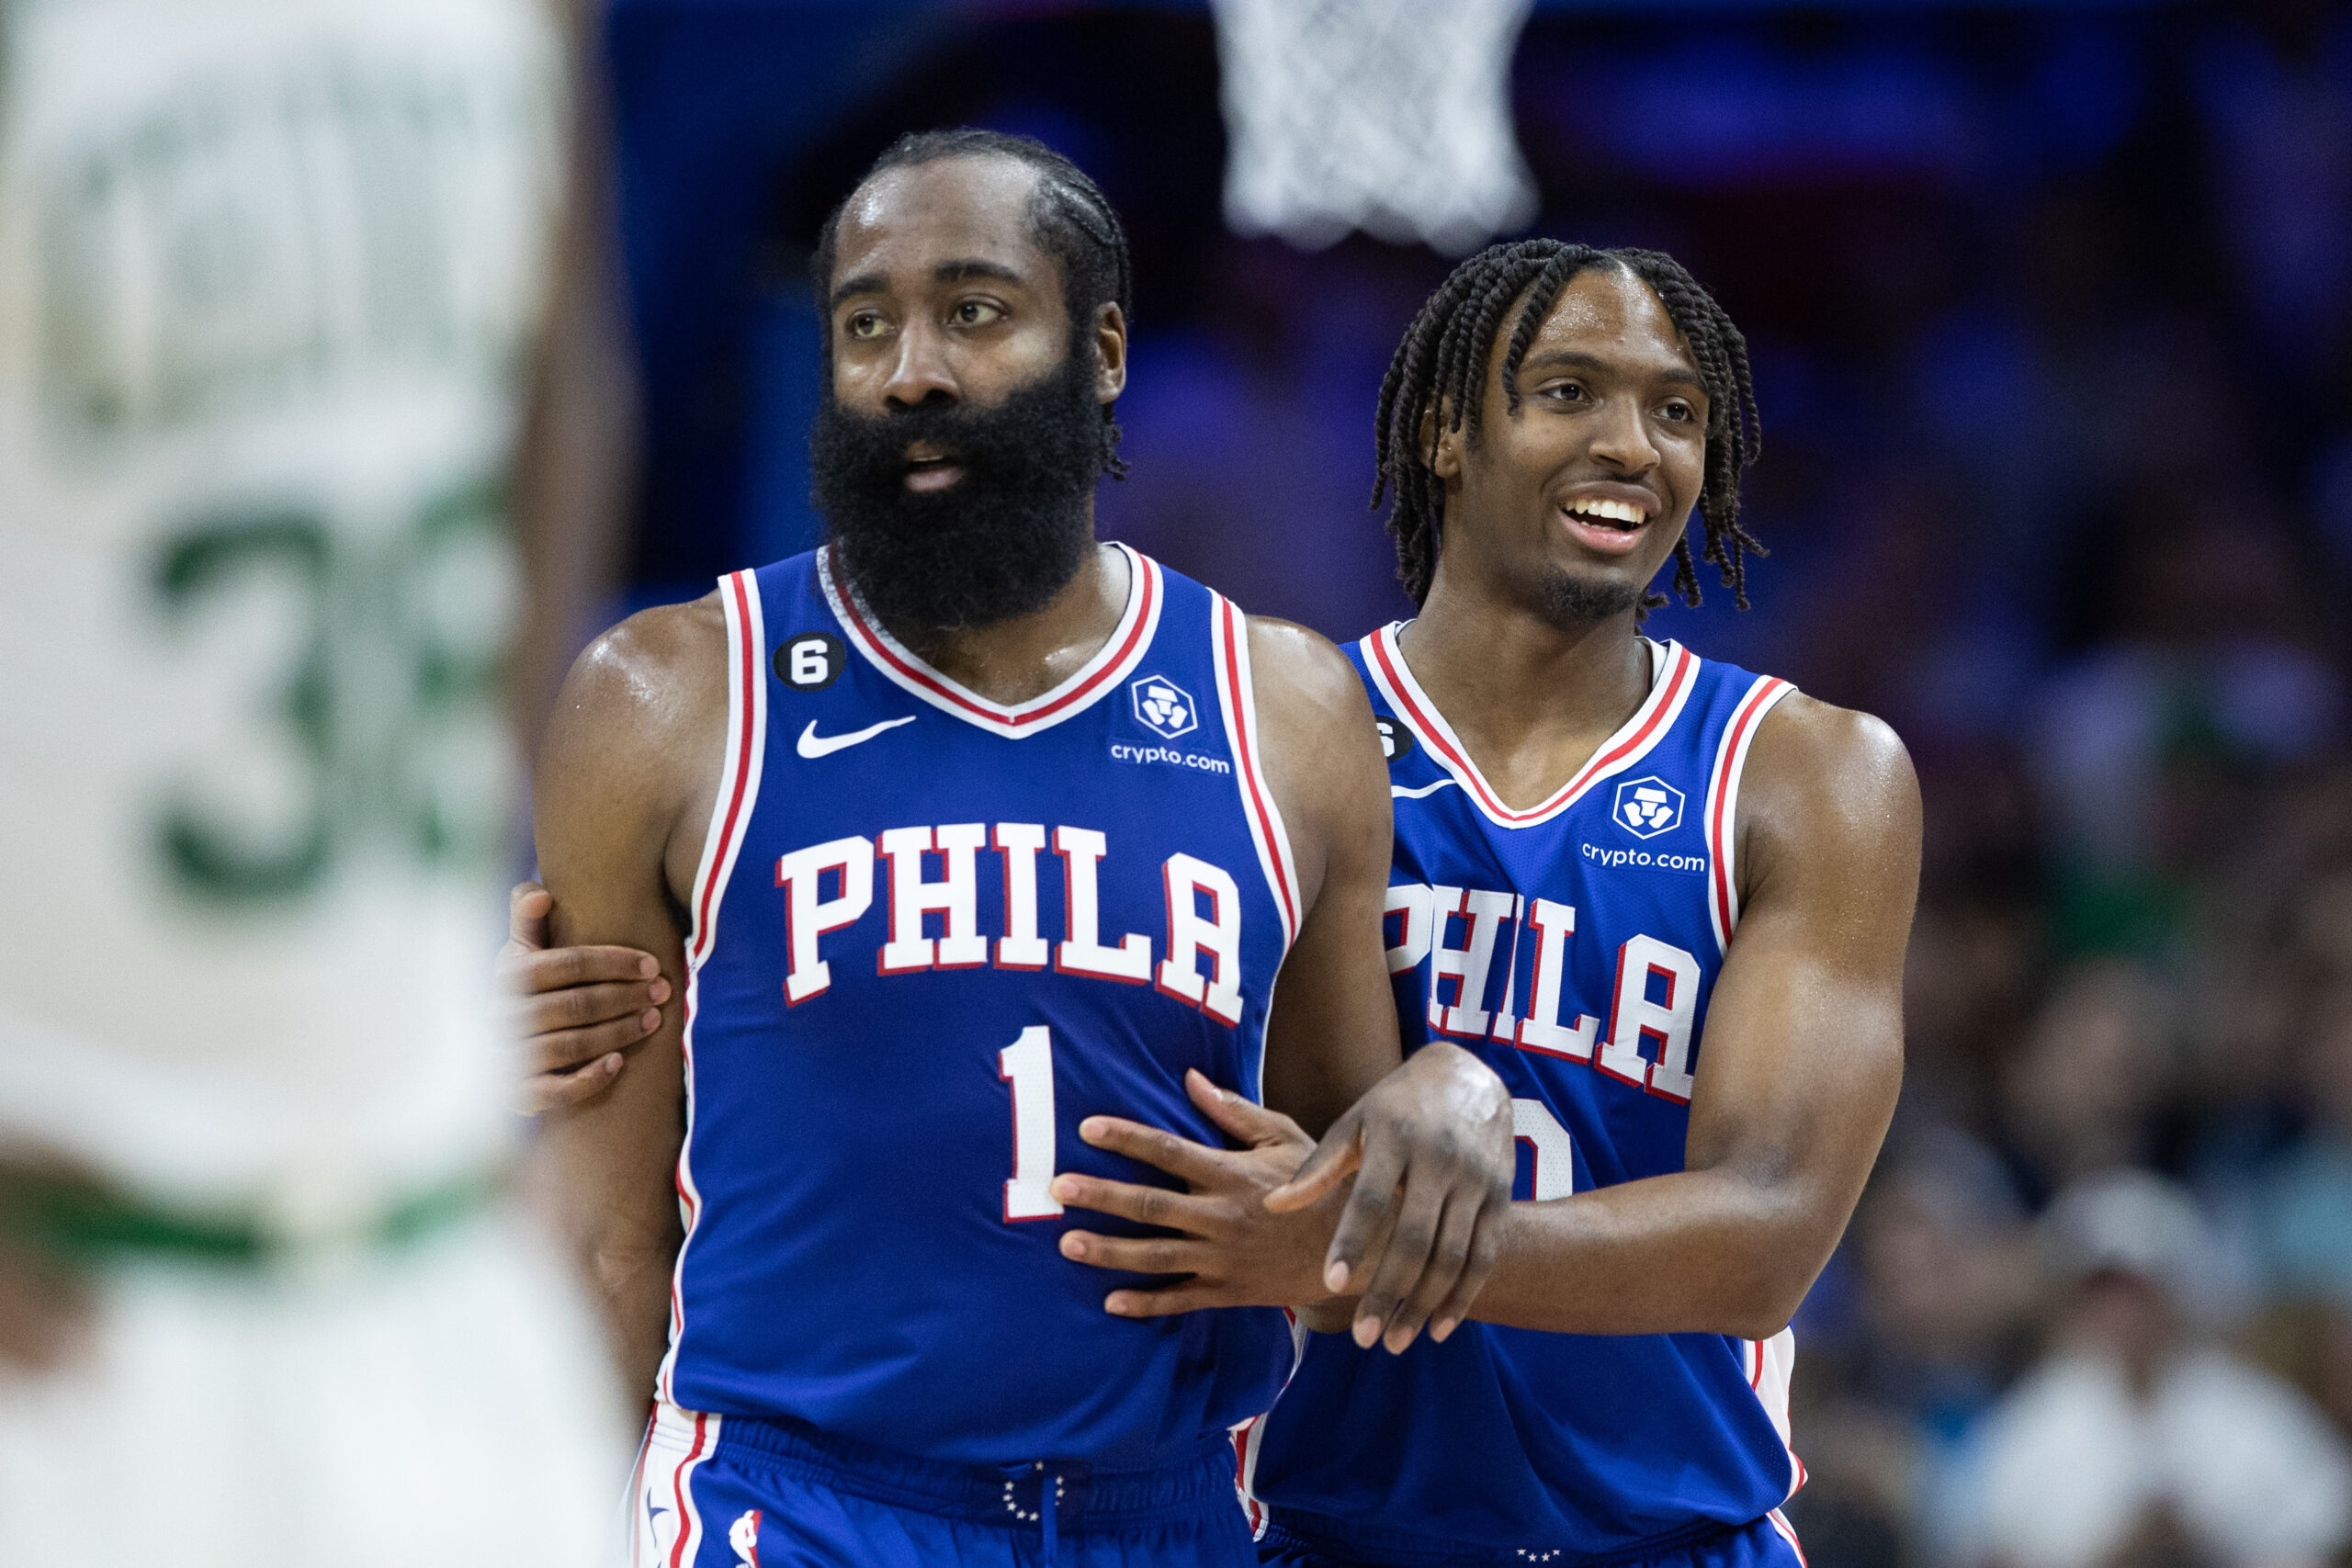 April 5 East playoff picture update after Sixers defeated Celtics at home